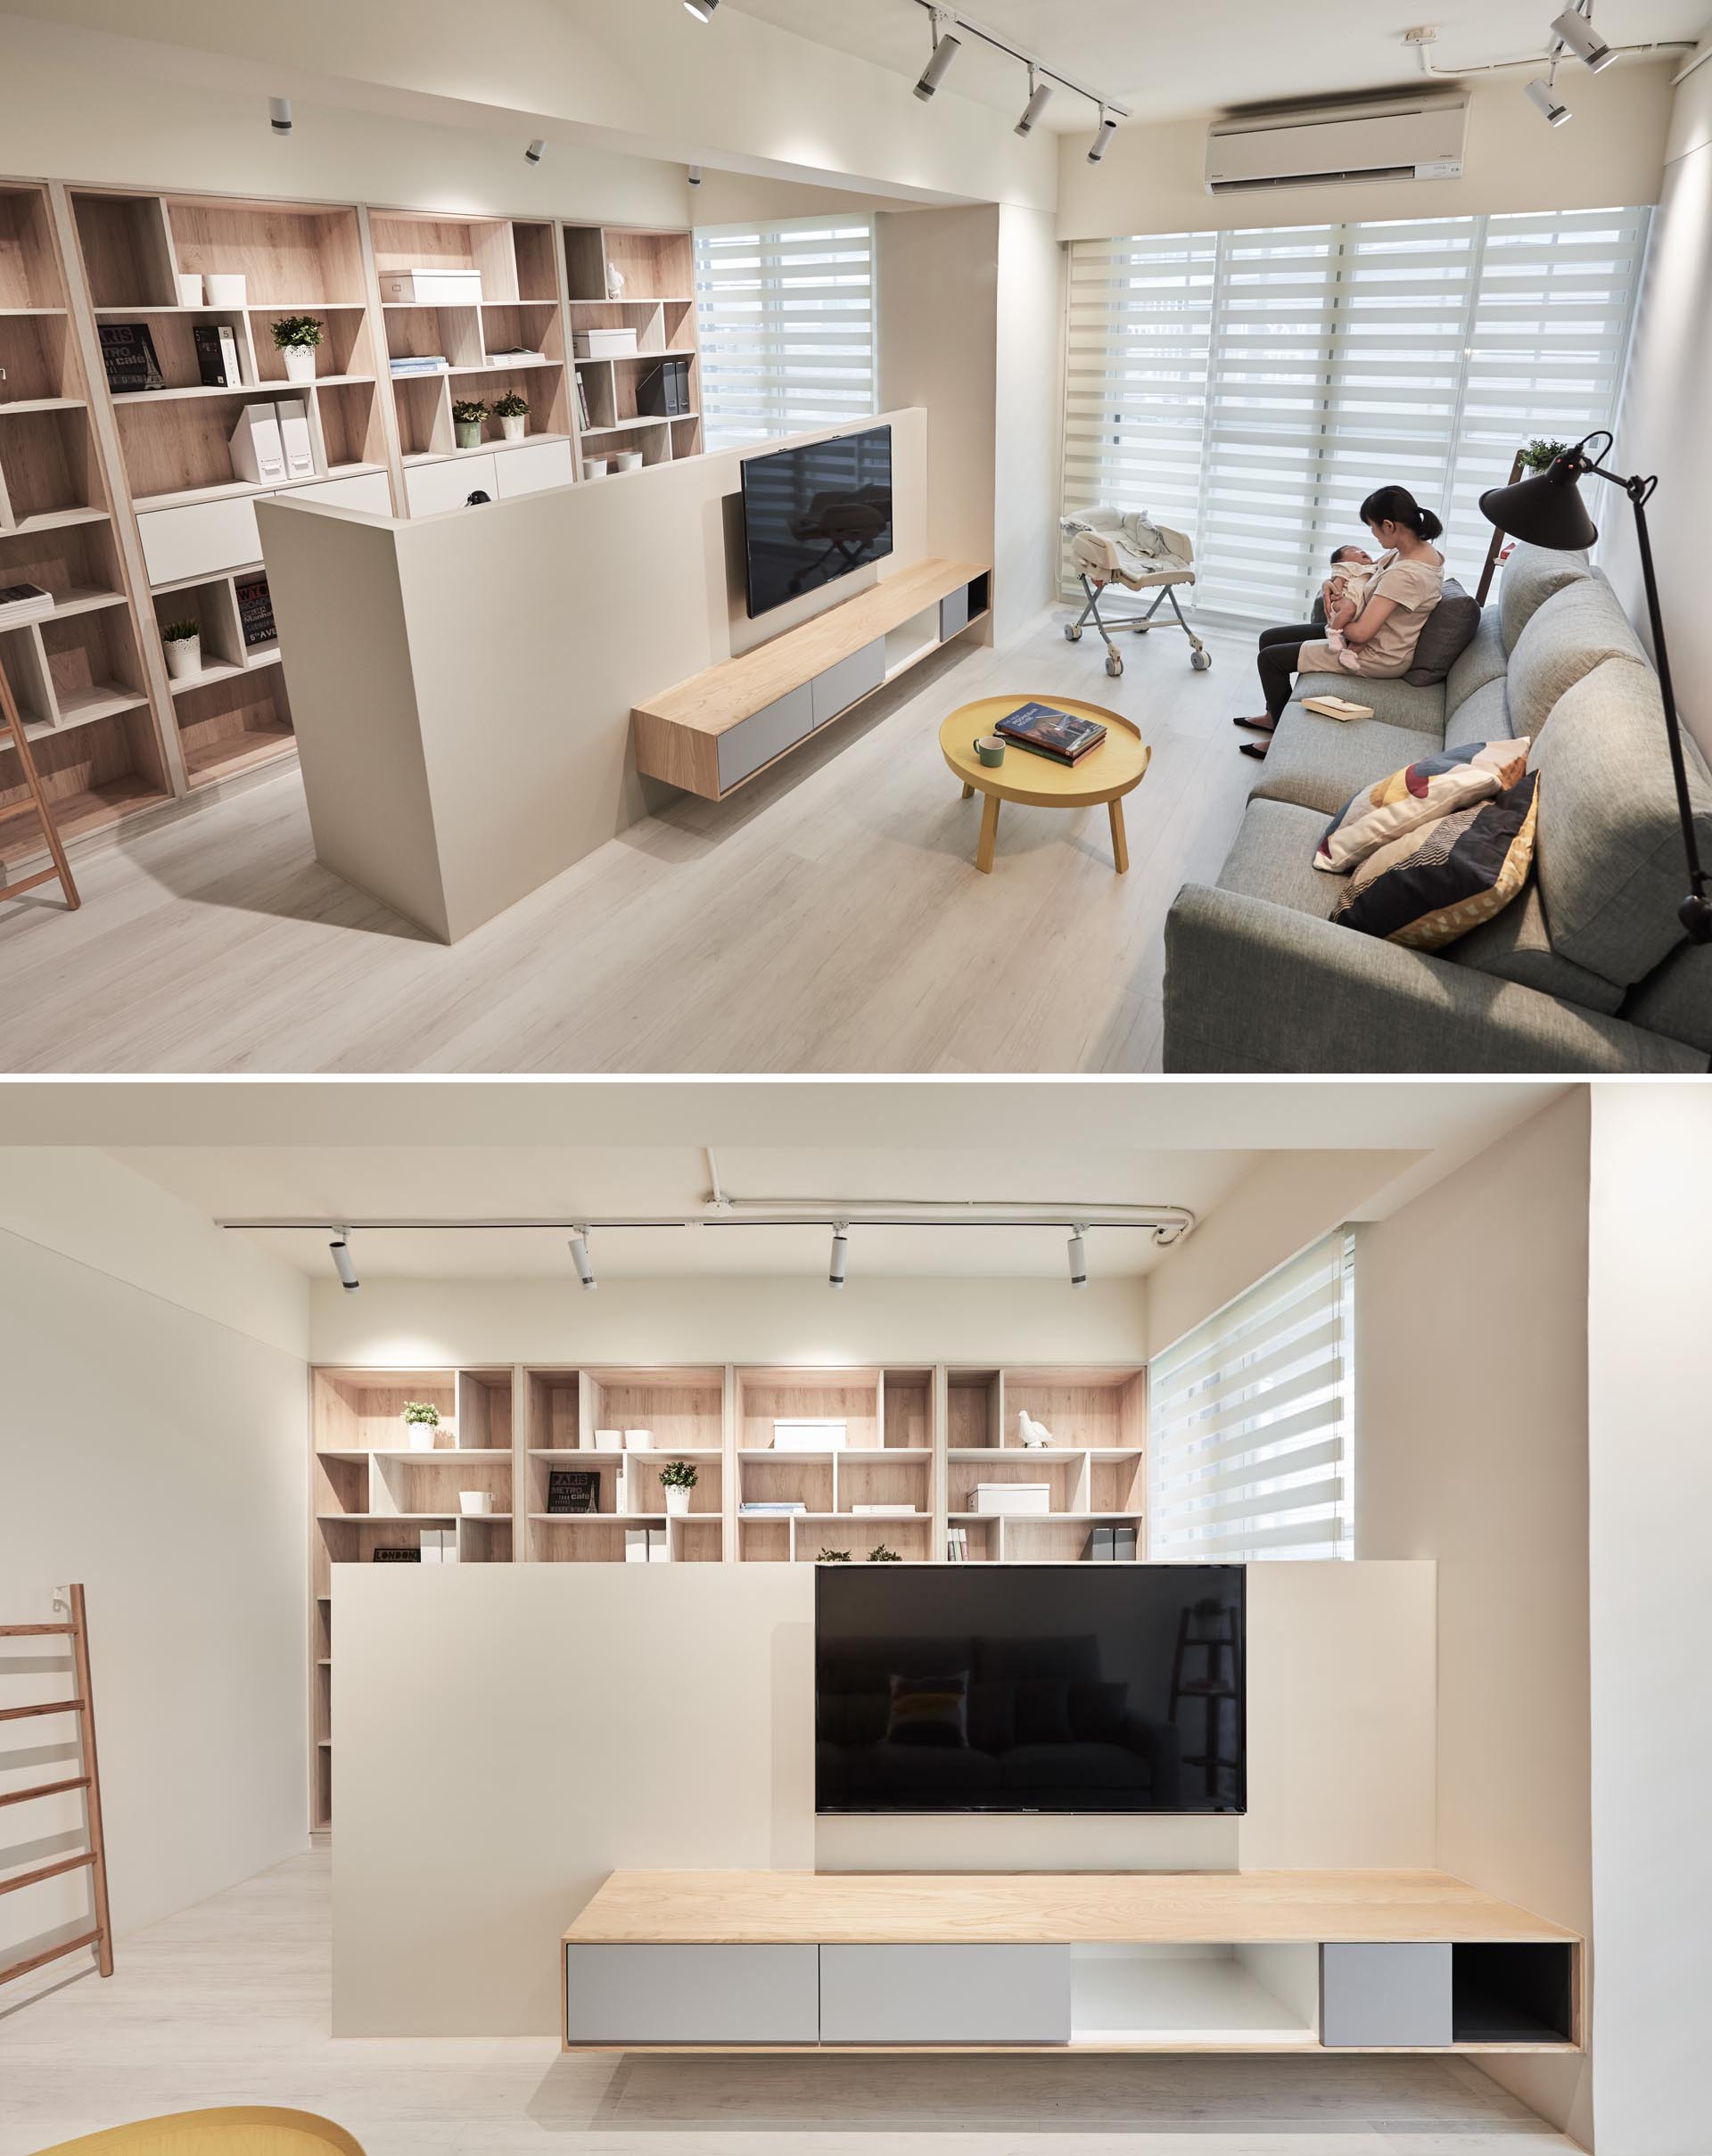 A low partition wall creates a space for a home office in this apartment living room.